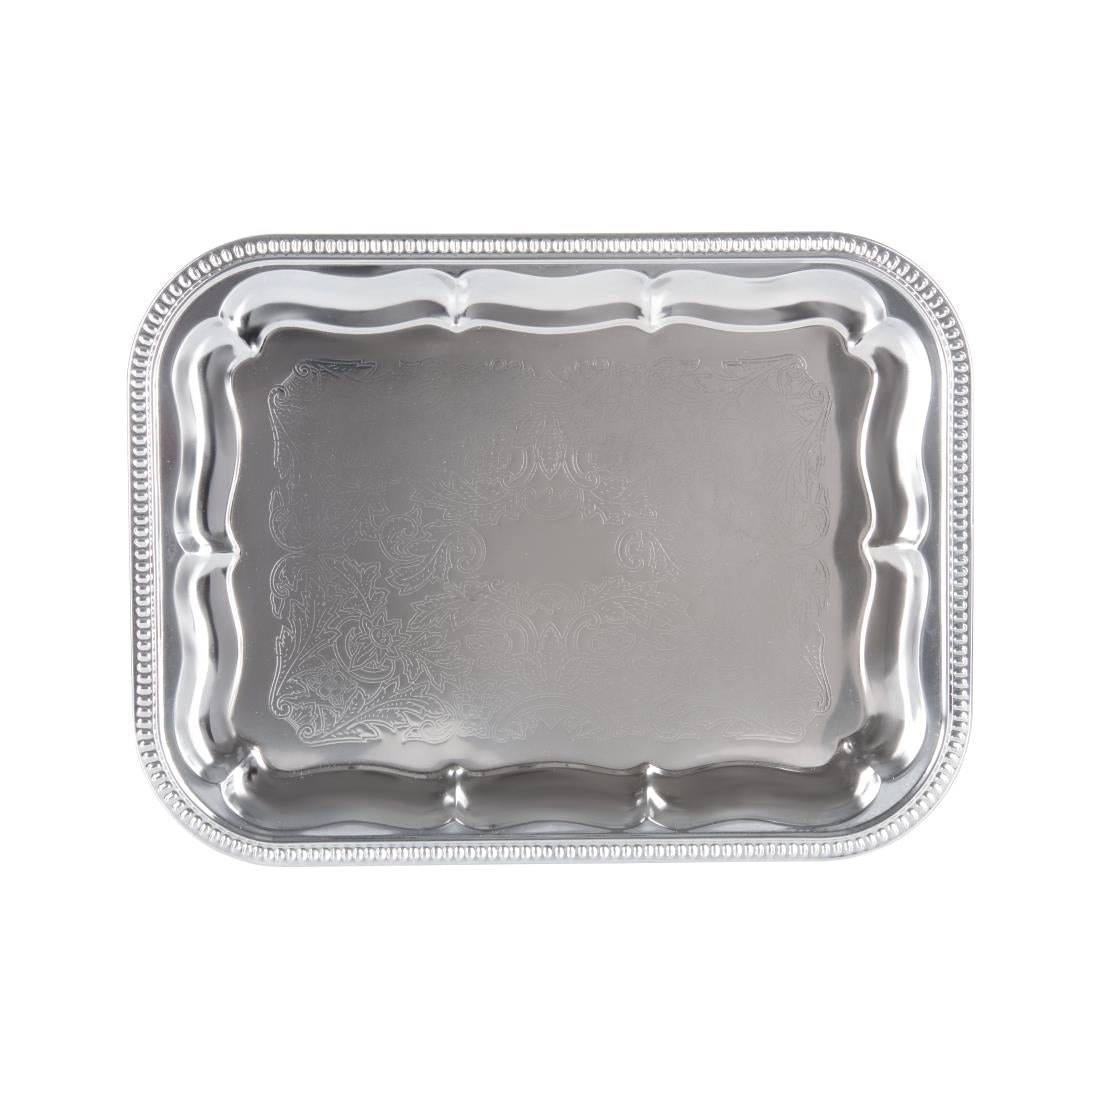 APS Semi-Disposable Party Tray 410 x 310mm Chrome JD Catering Equipment Solutions Ltd